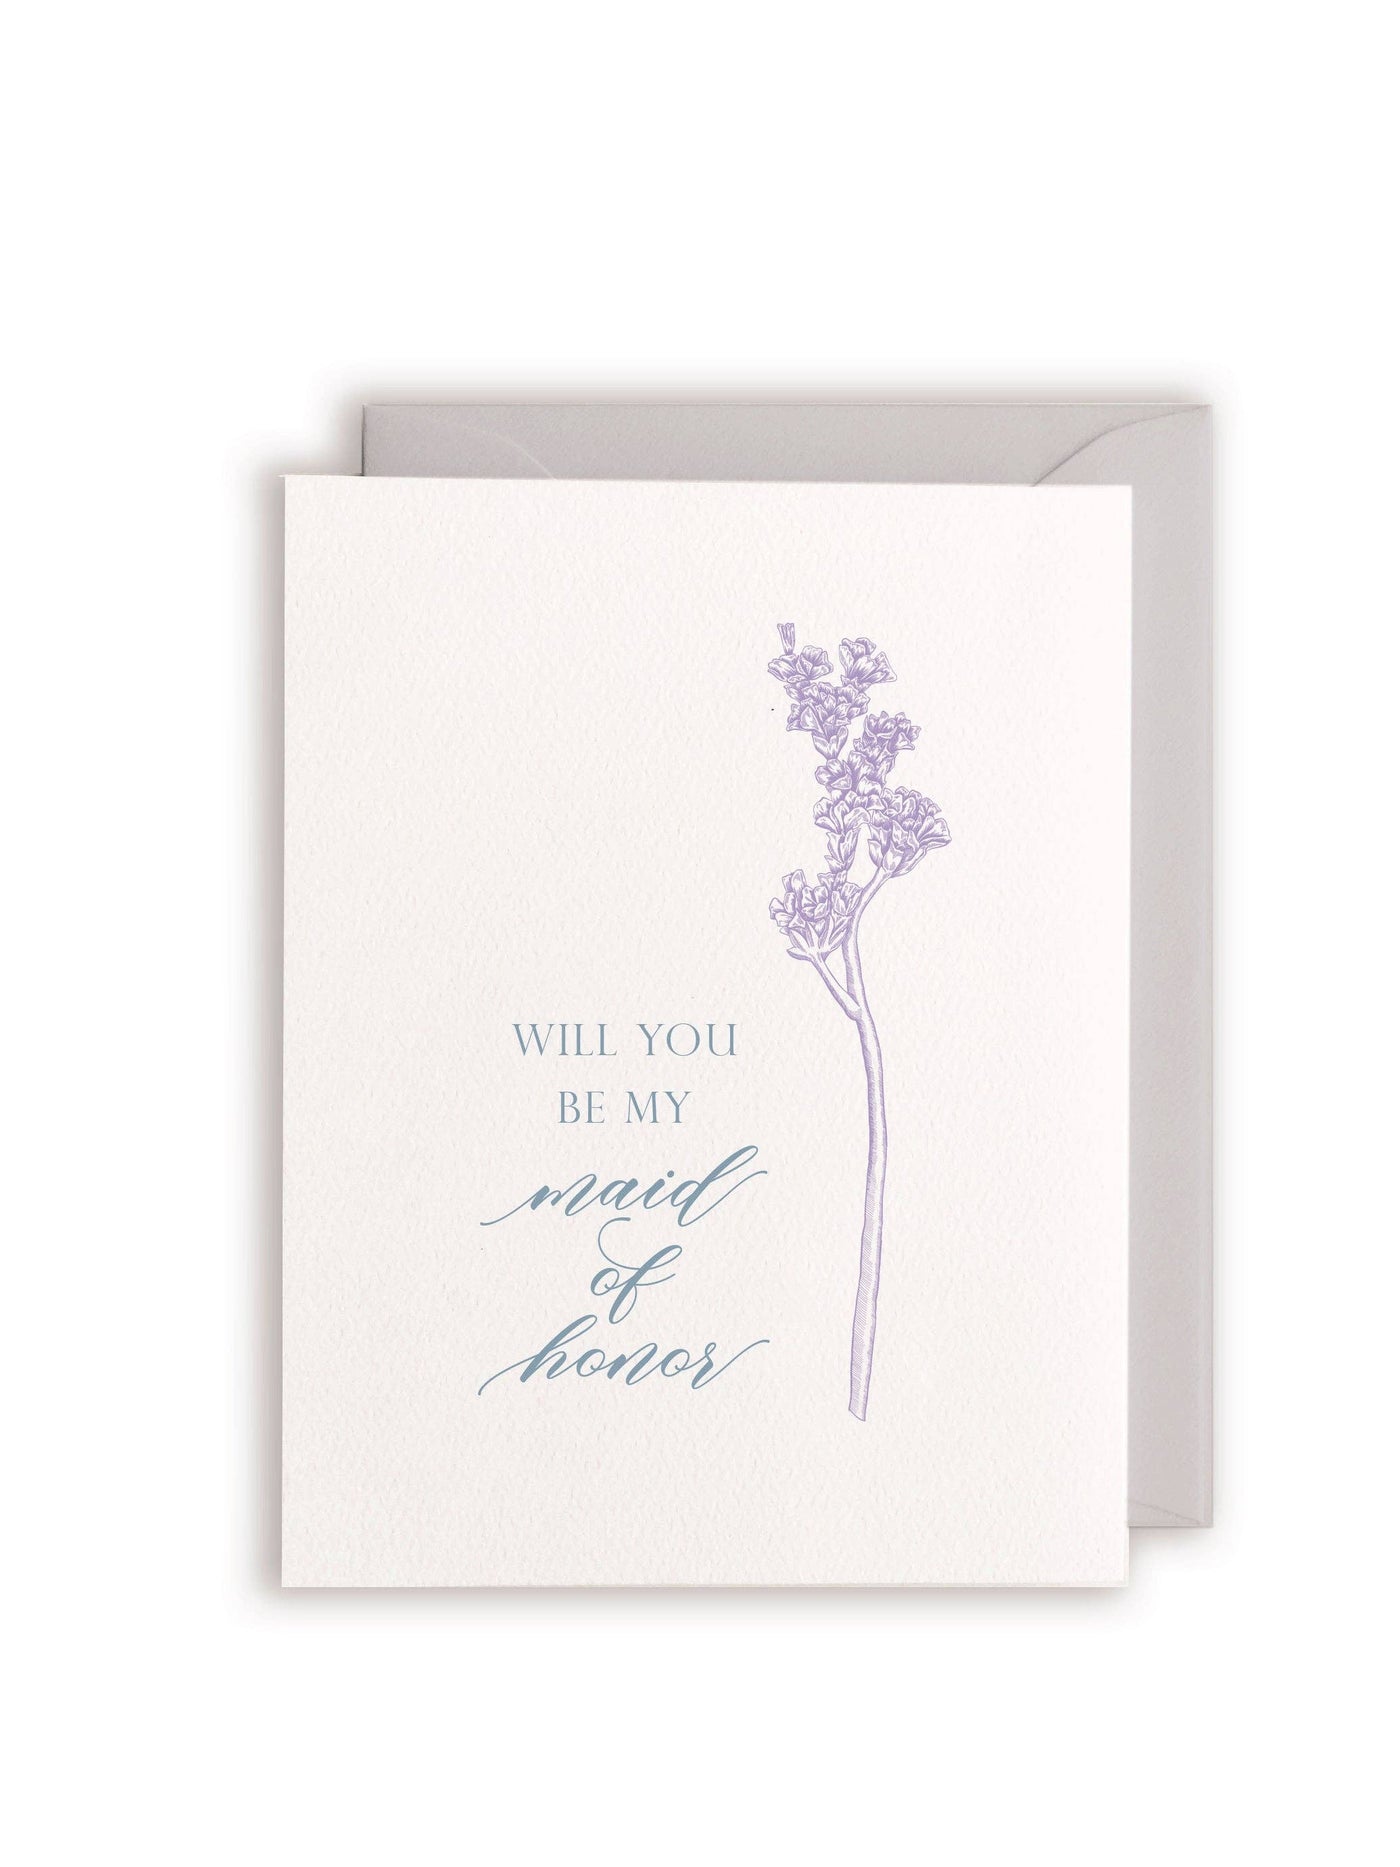 Be My Maid of Honor Letterpress Greeting Card